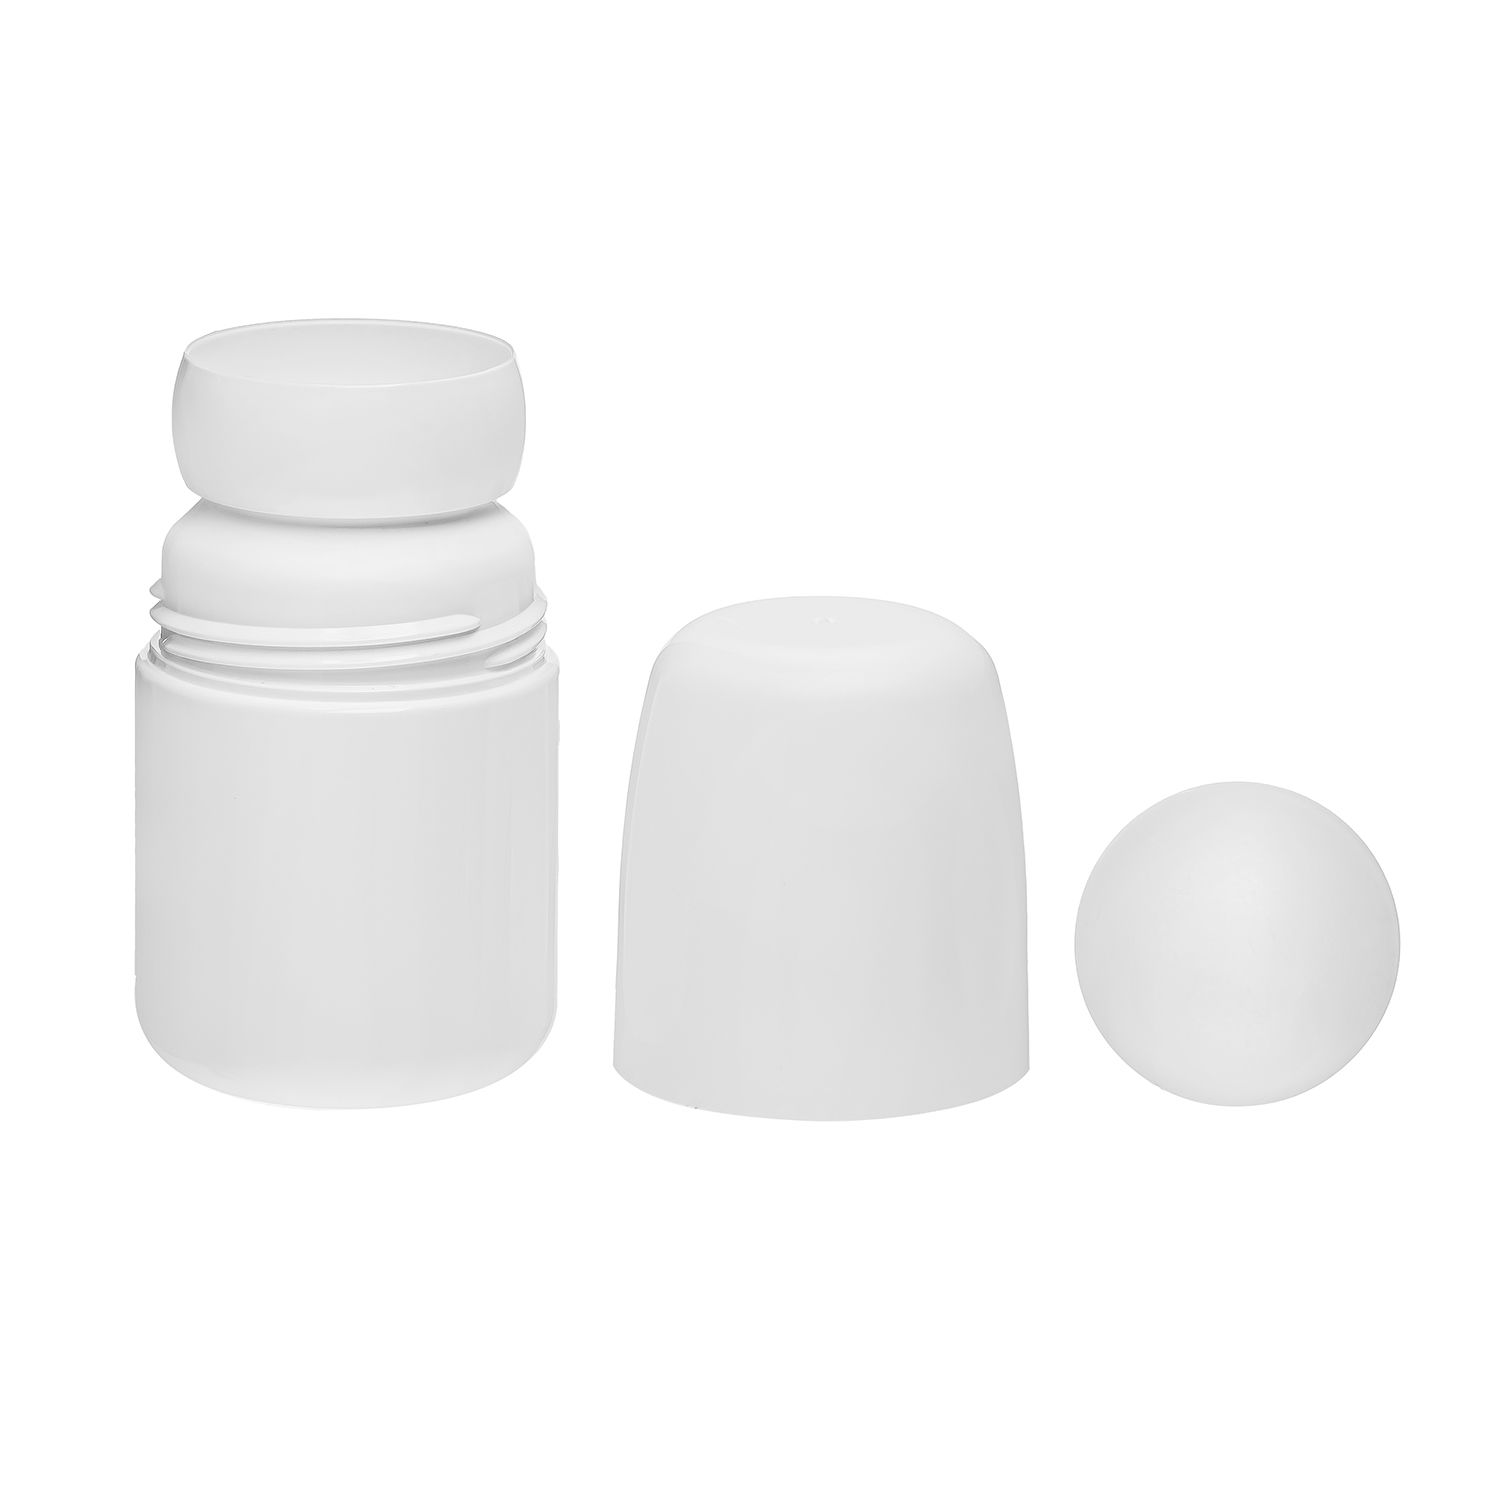 <p class="p1">The 50 ml bottle is made of plastic and is presented in white, which will provide protection from sunlight of products, prolong the shelf life. It is equipped with a plastic lid and a ball. Designed for personal hygiene products, namely liquid sharik antiperspirants.</p>